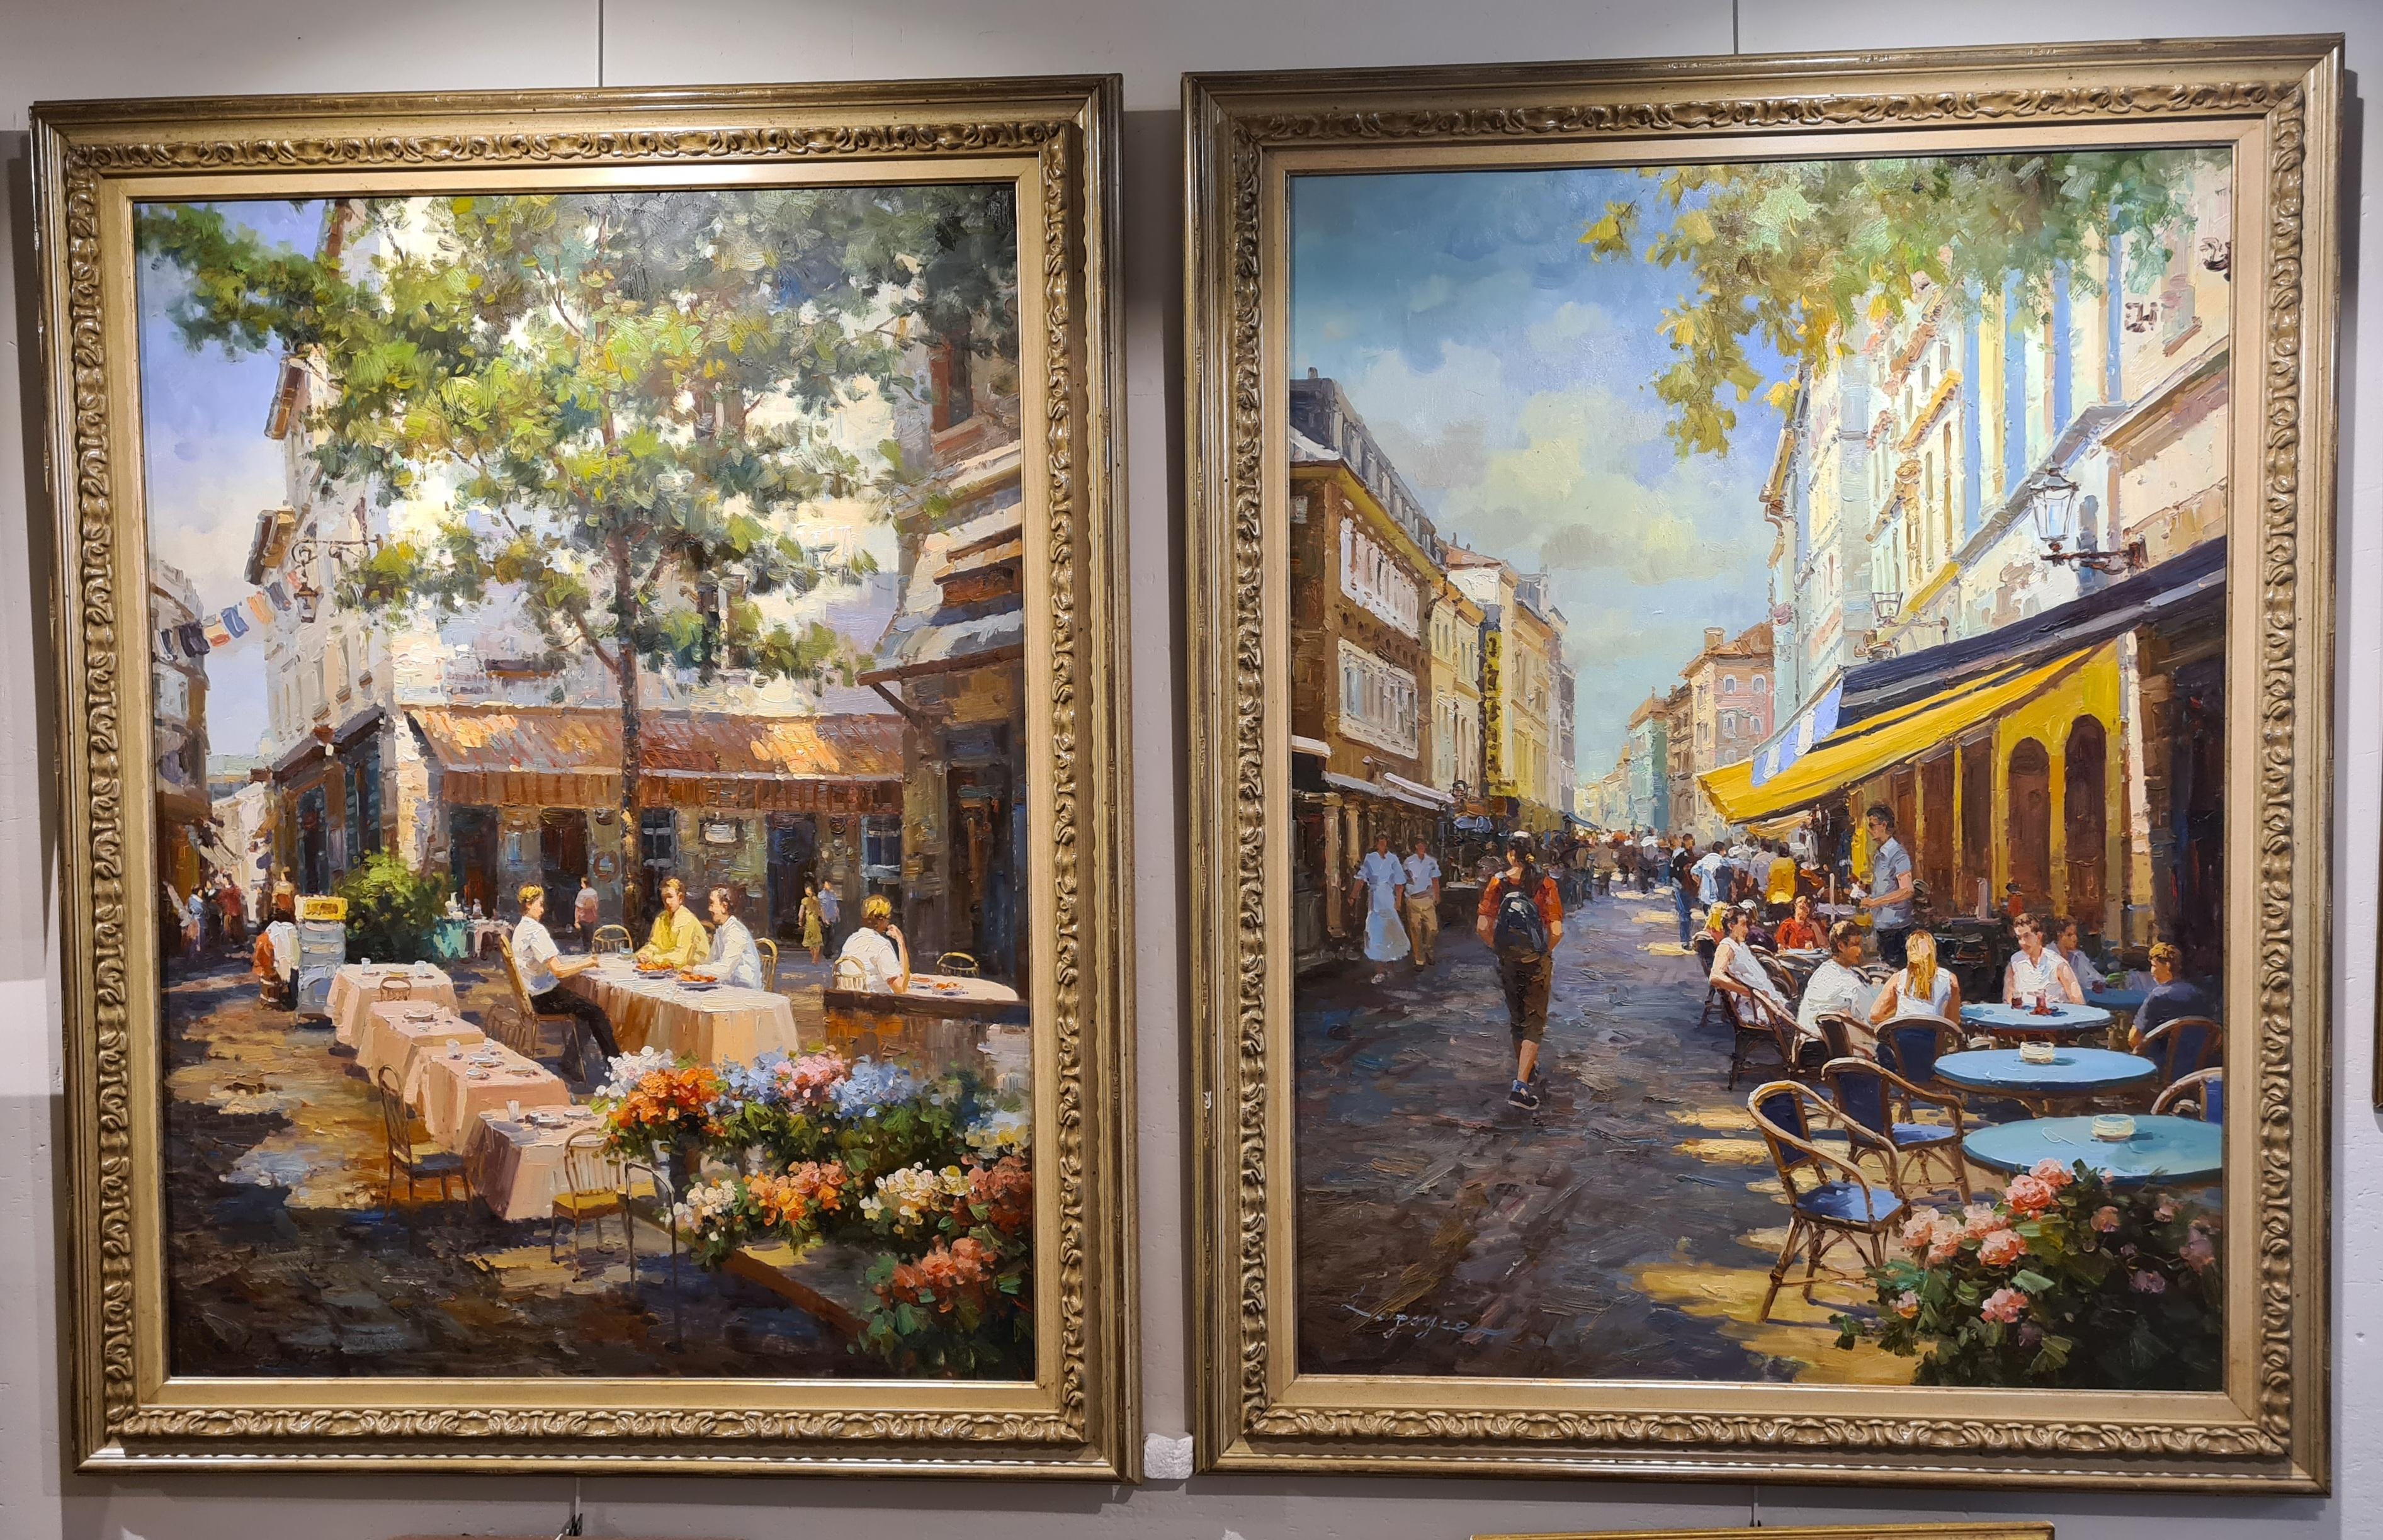 L Joyce Figurative Painting - The Cafés of Paris, Pair of Large Oil on Canvas Iconic Street Views of France